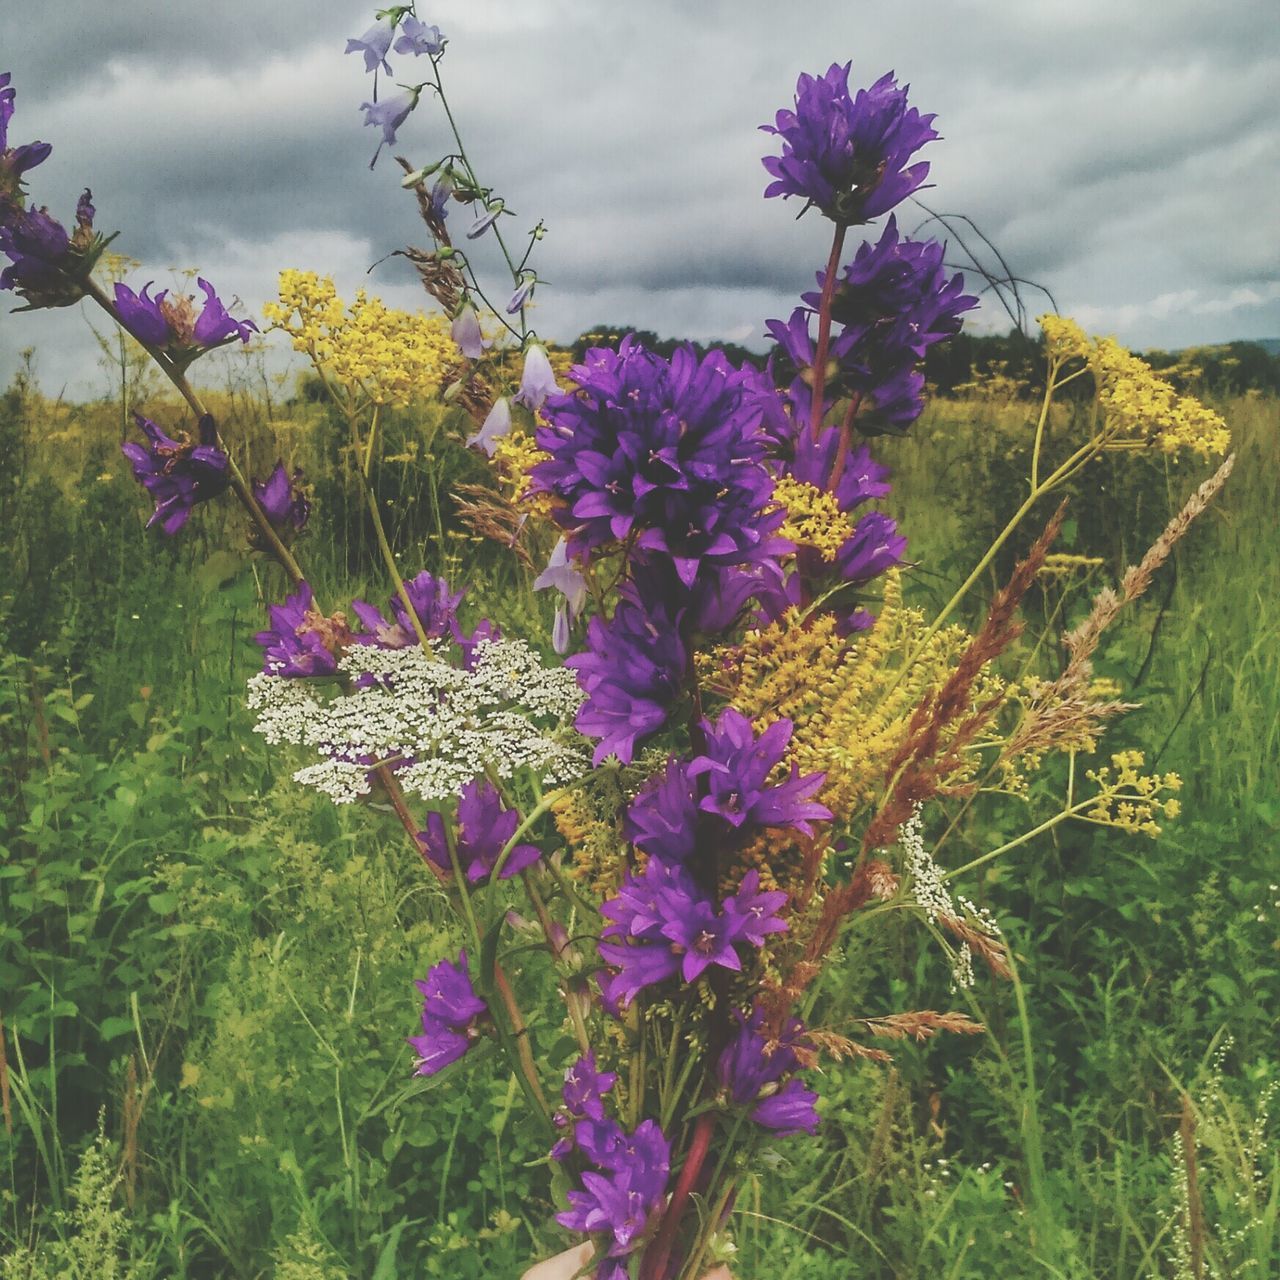 flower, freshness, growth, fragility, beauty in nature, plant, nature, blooming, purple, sky, field, petal, in bloom, cloud - sky, stem, green color, flower head, day, tranquility, wildflower